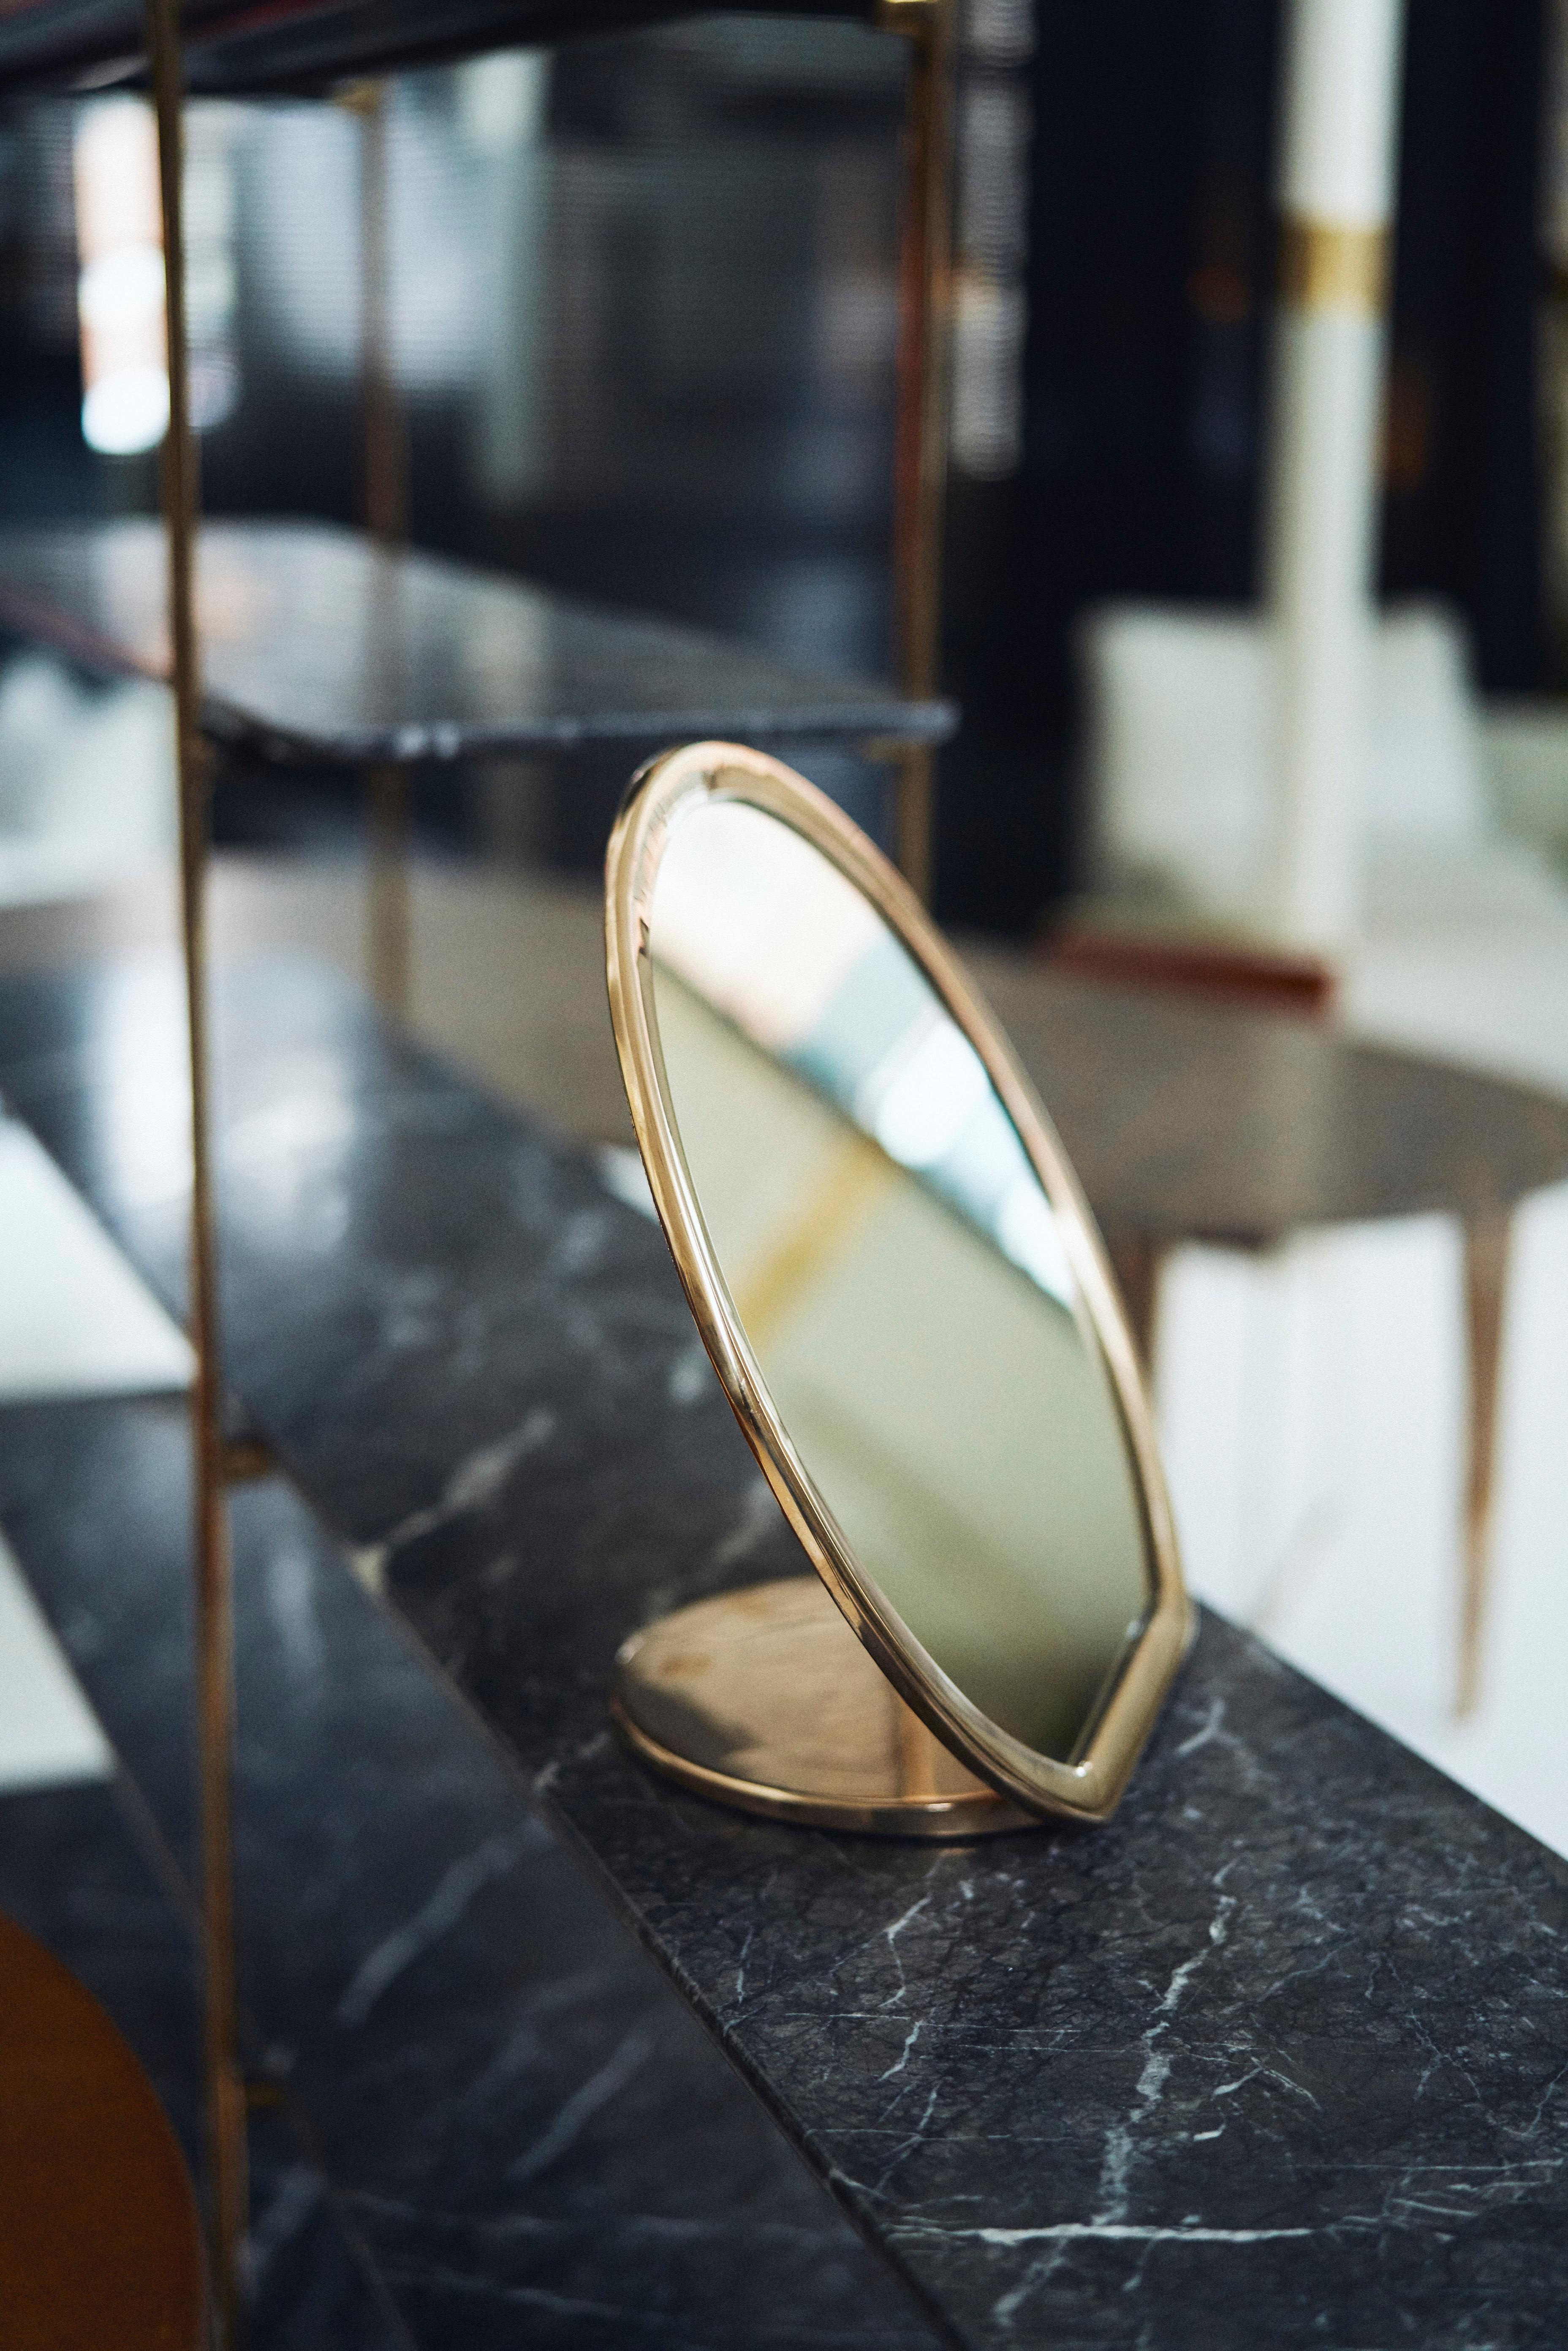 Designed by Daniel Barbera, the 'Bronze' make-up mirror is made from a sandcast solid bronze form that is hand finished to a smooth mirror polish, with the option of a satin or blackened bronze. Sculptural and minimal this mirror makes a create